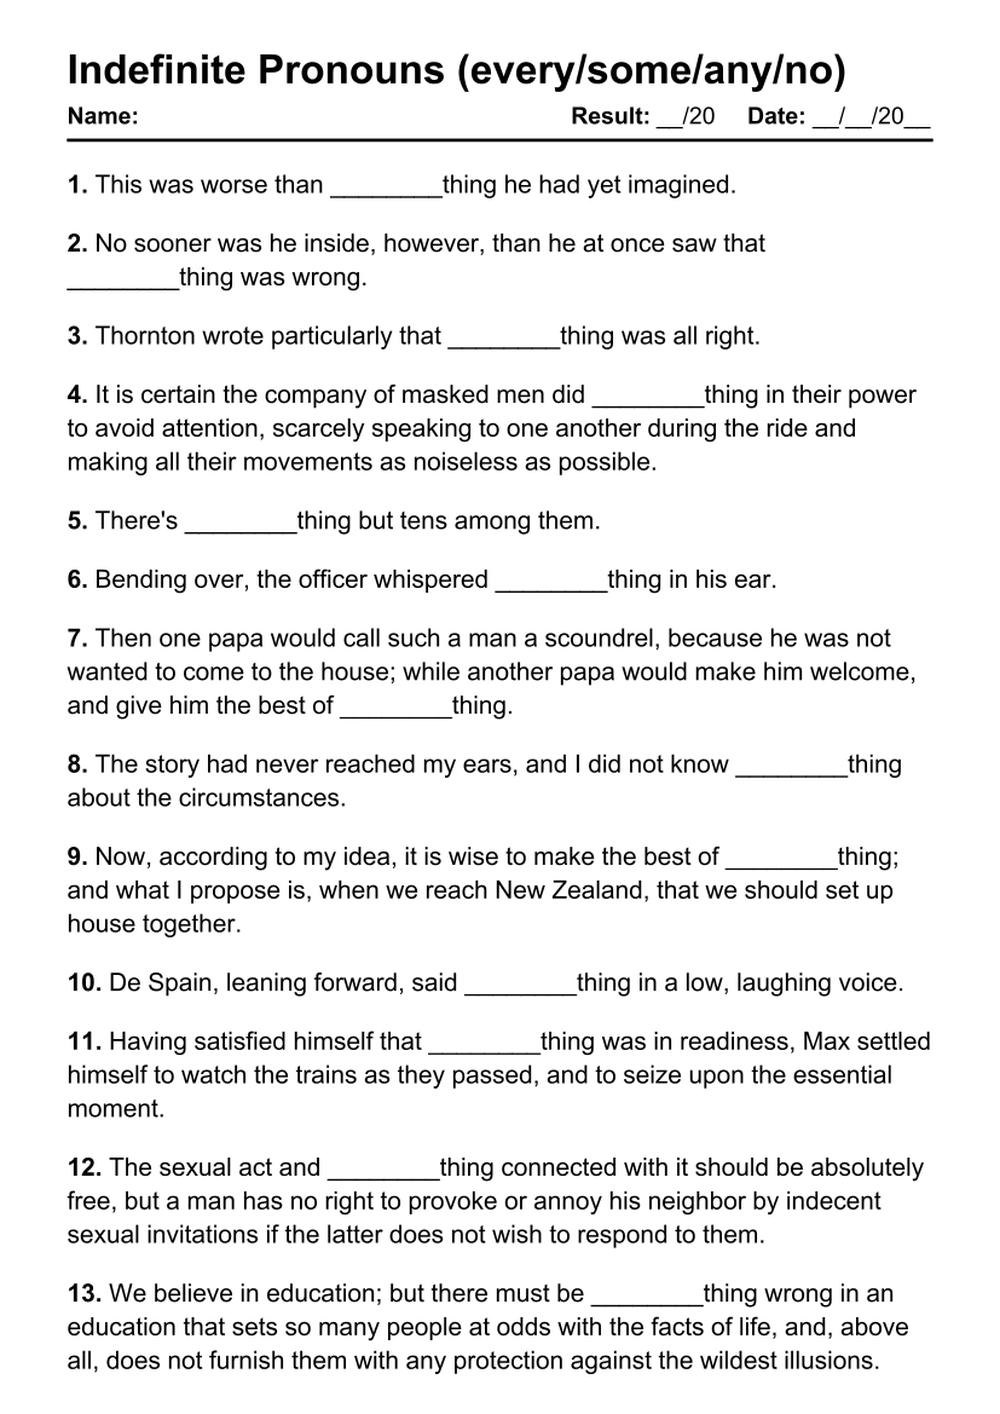 Printable Indefinite Pronouns Exercises - PDF Worksheet with Answers - Test 40